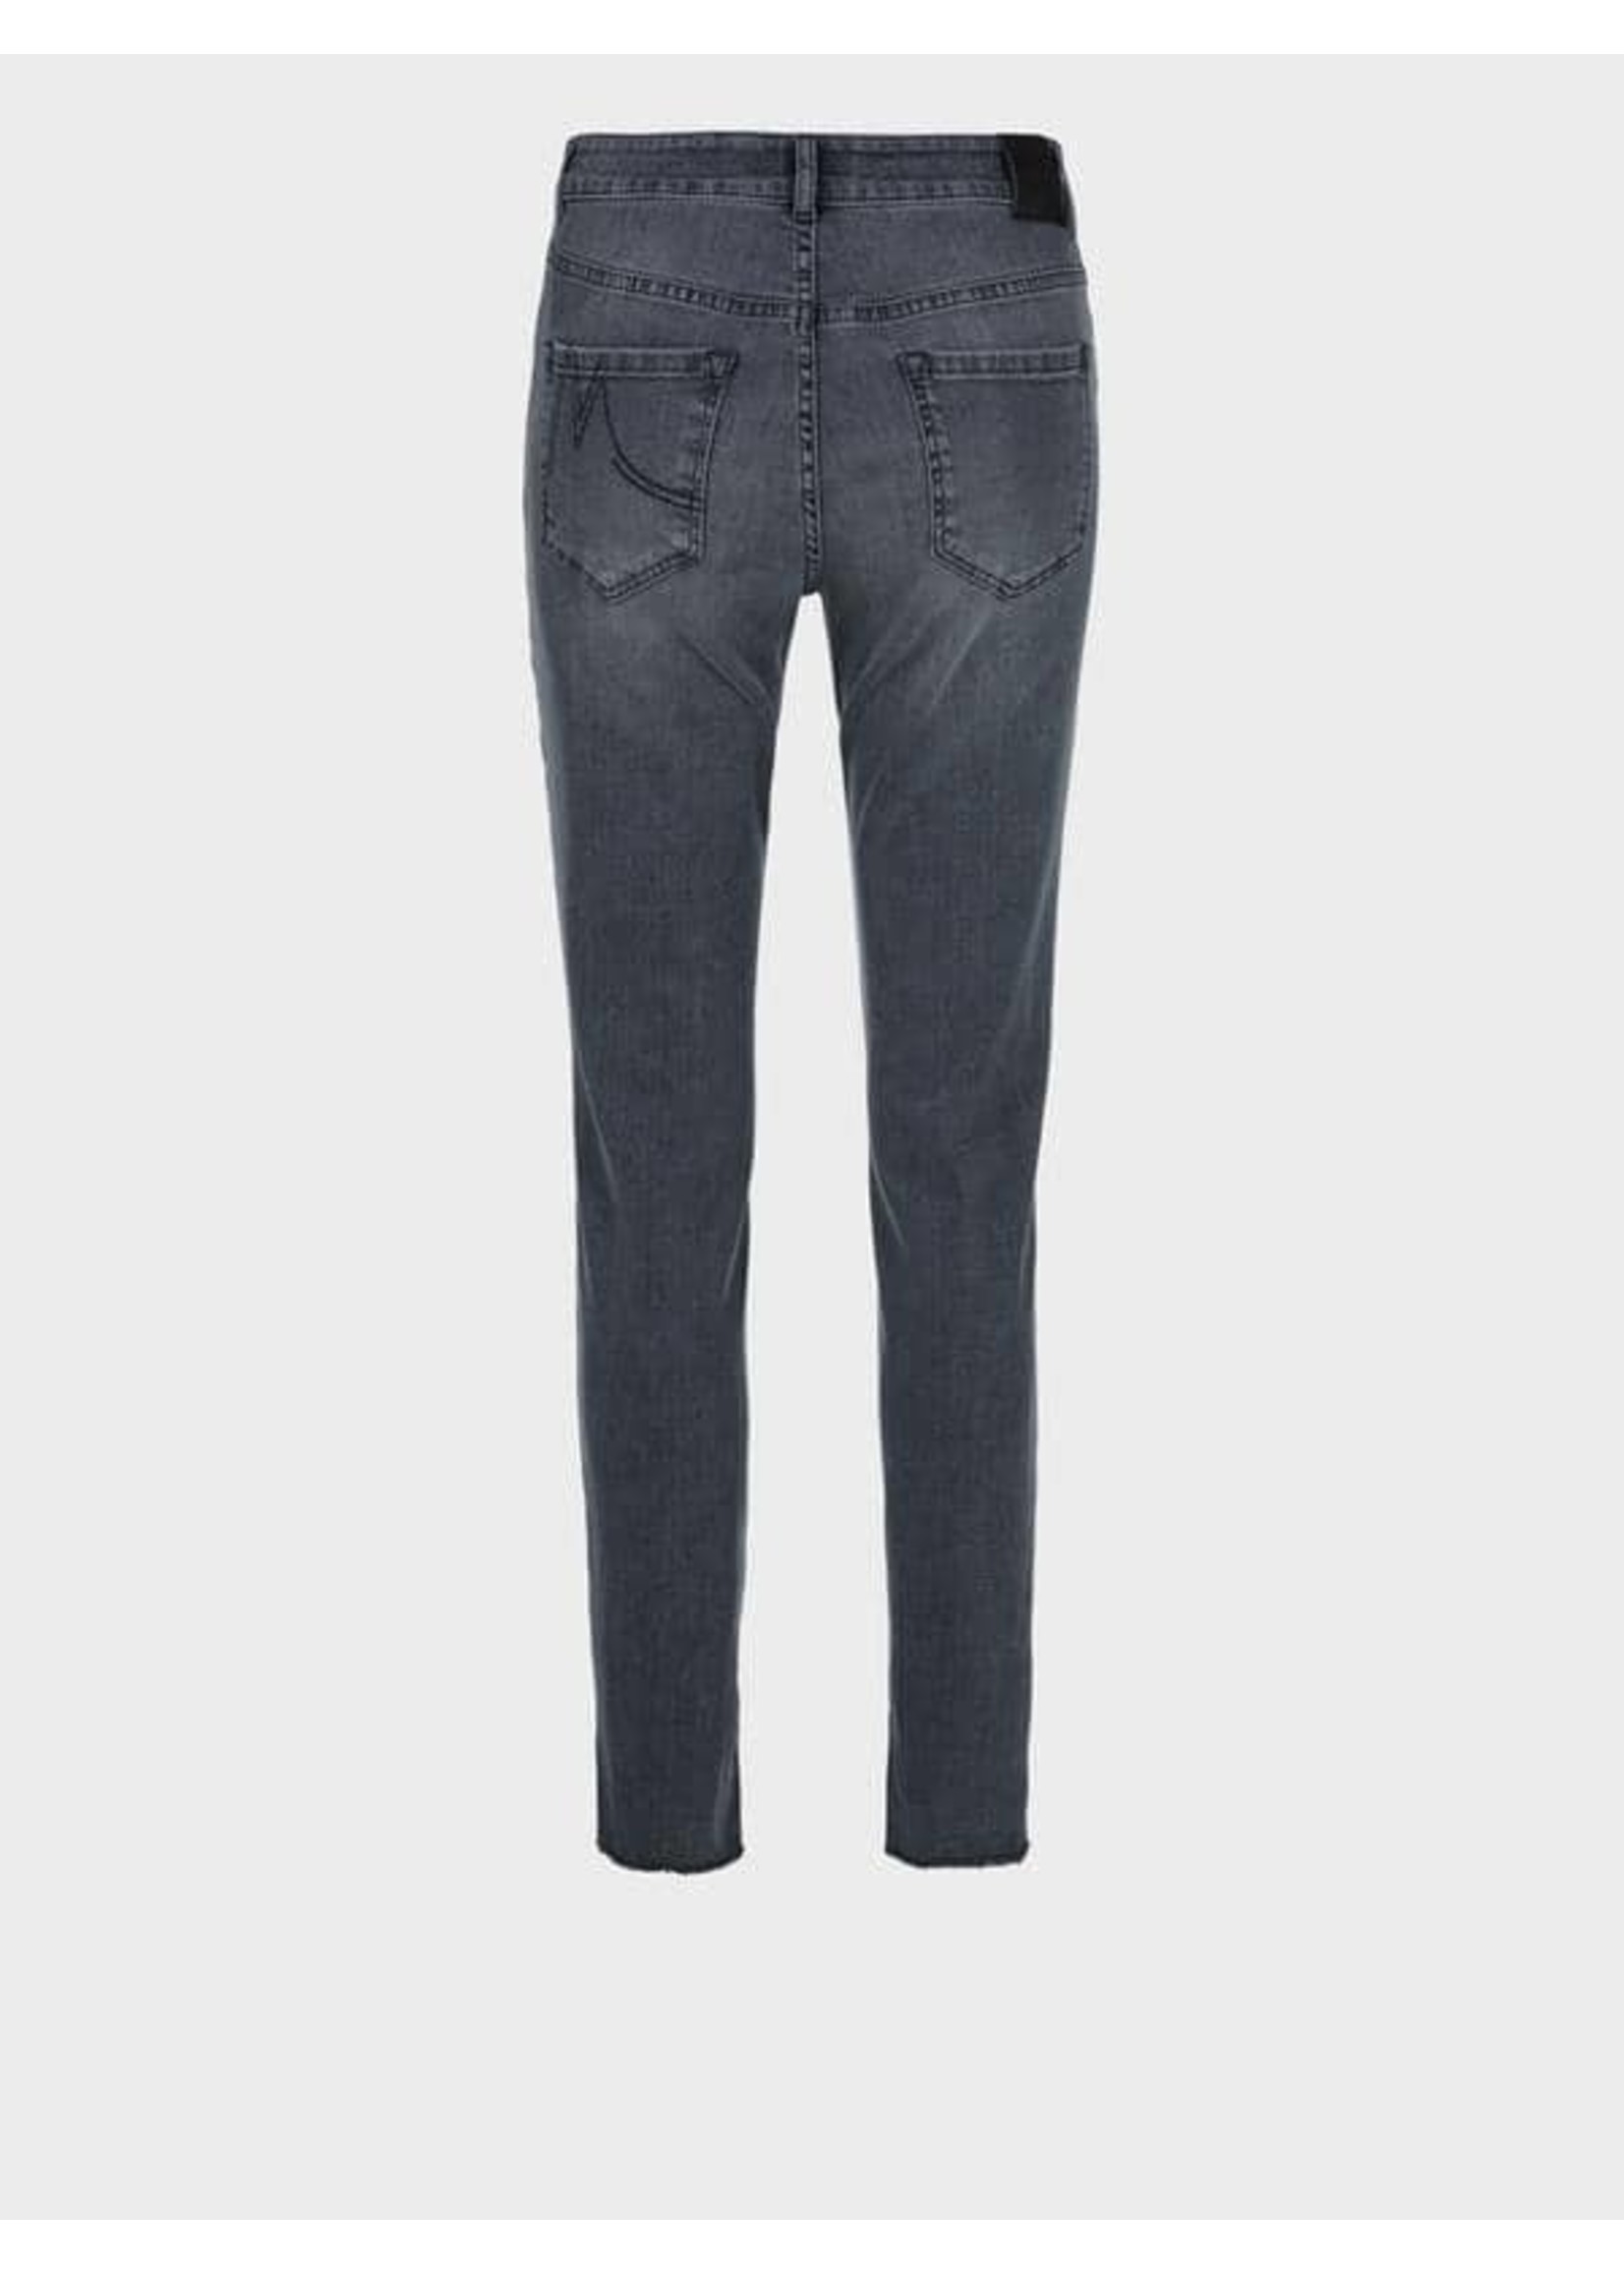 Marccain Sports Jeans SS 82.04 D73 889